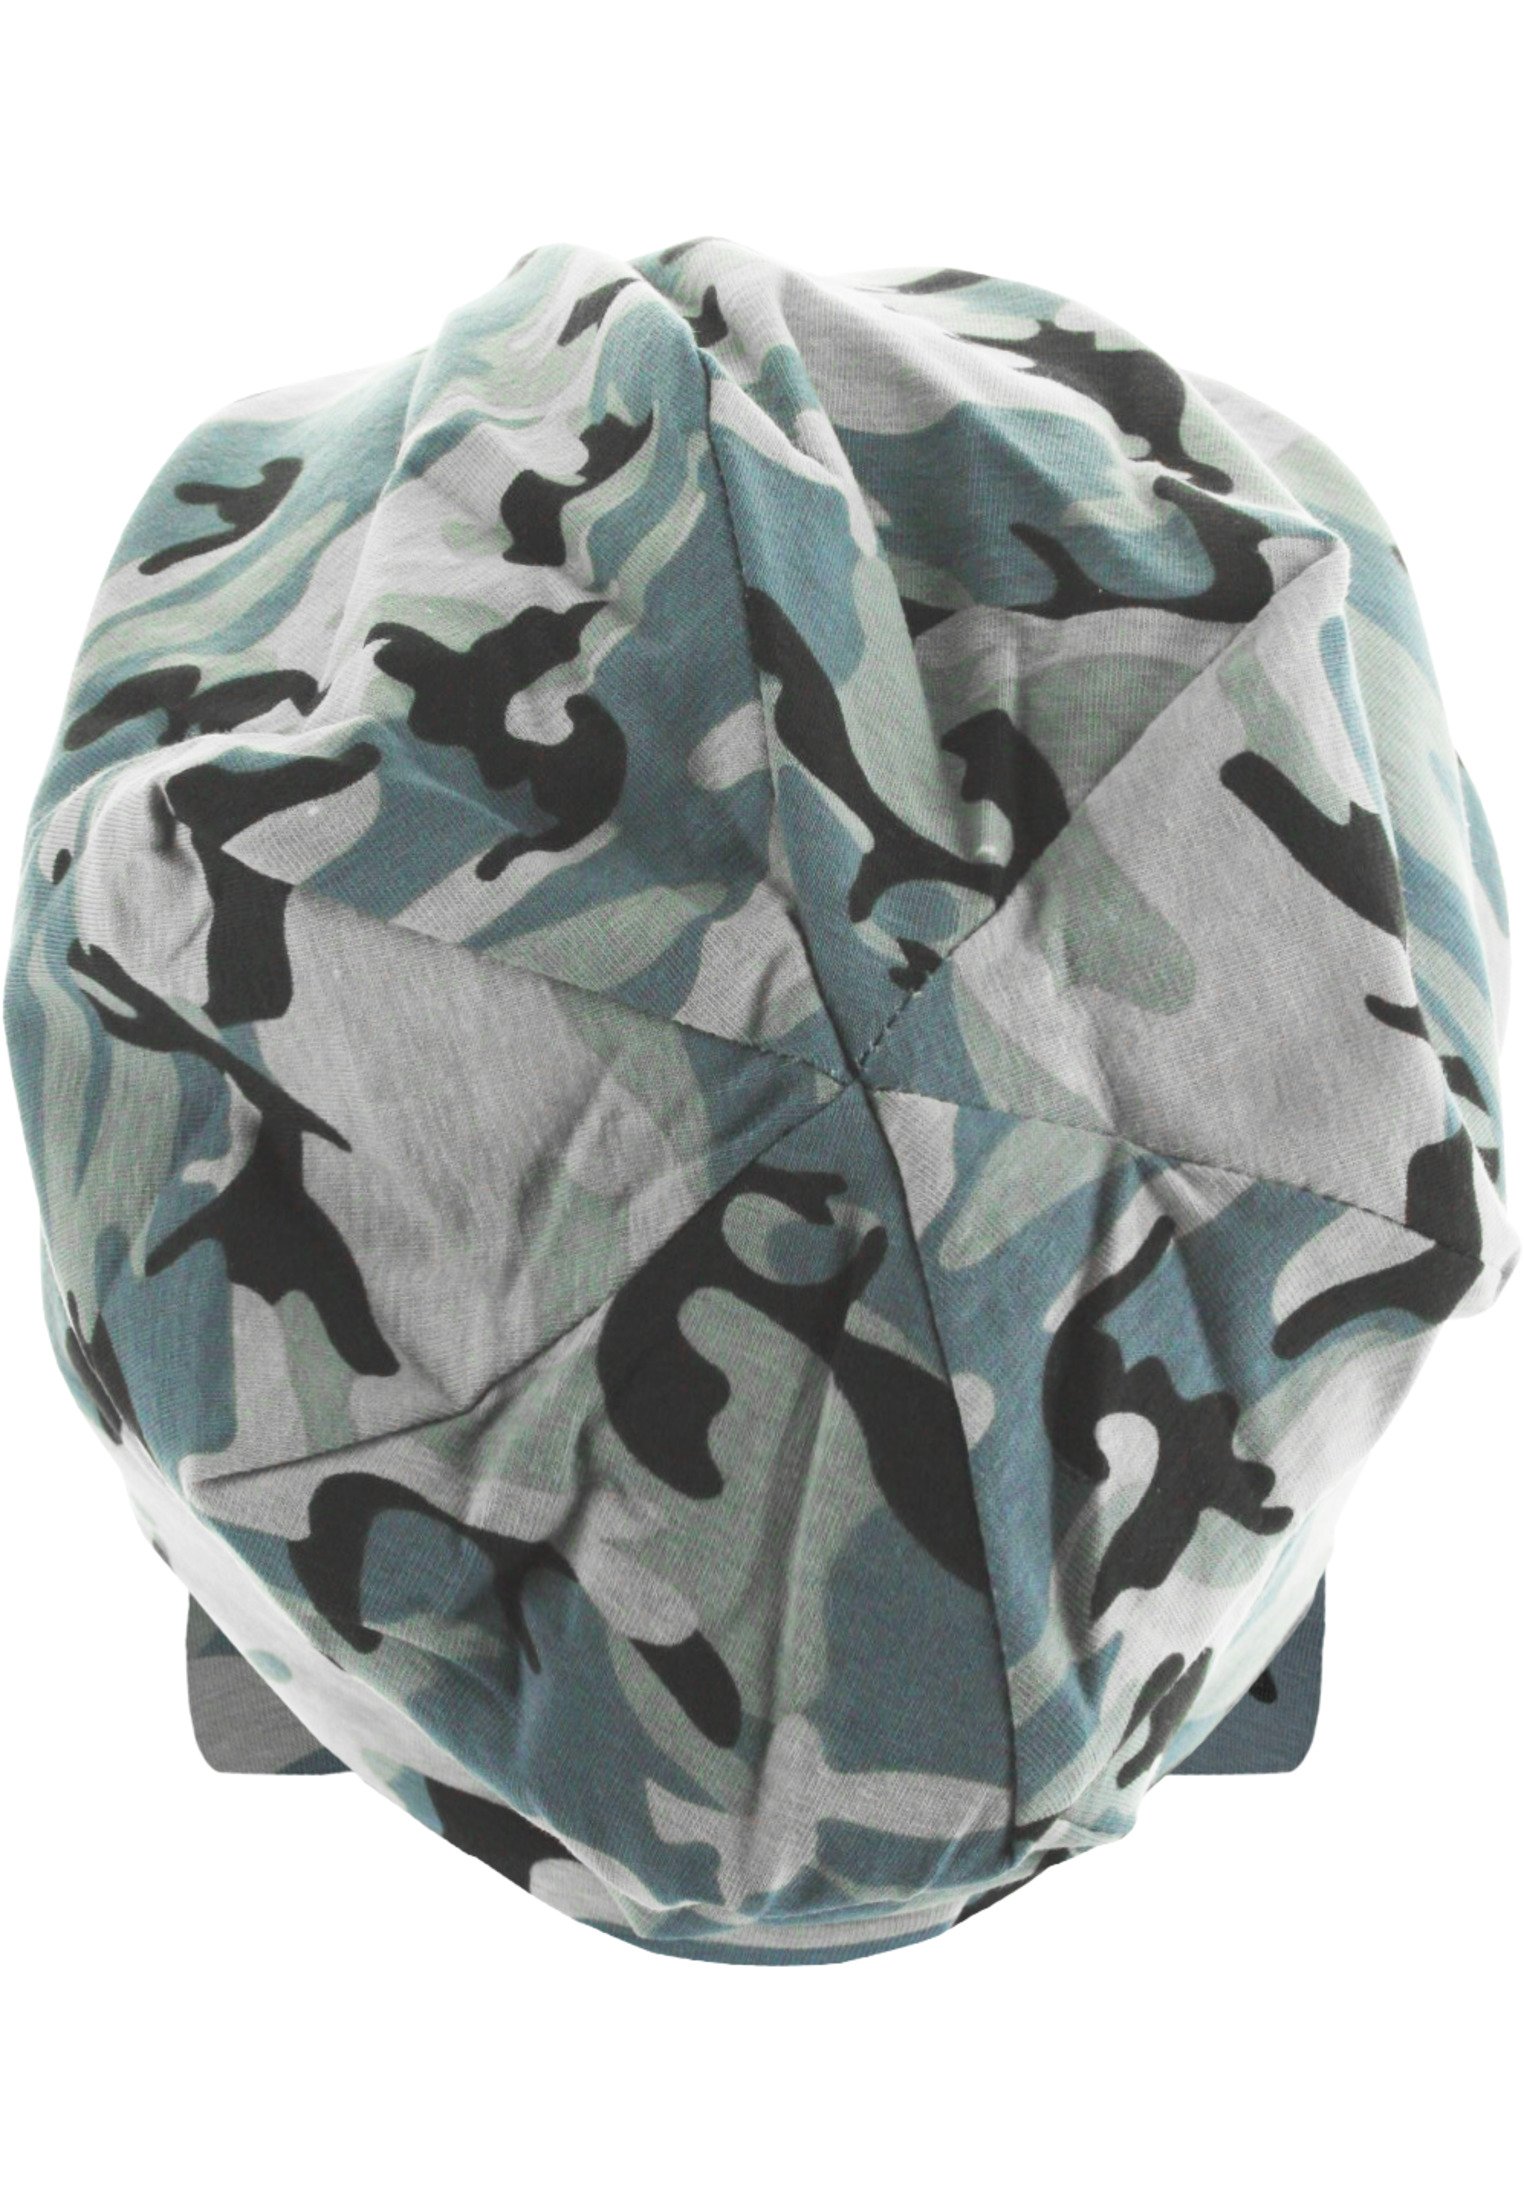 Printed Jersey Beanie grey camo/charcoal one size